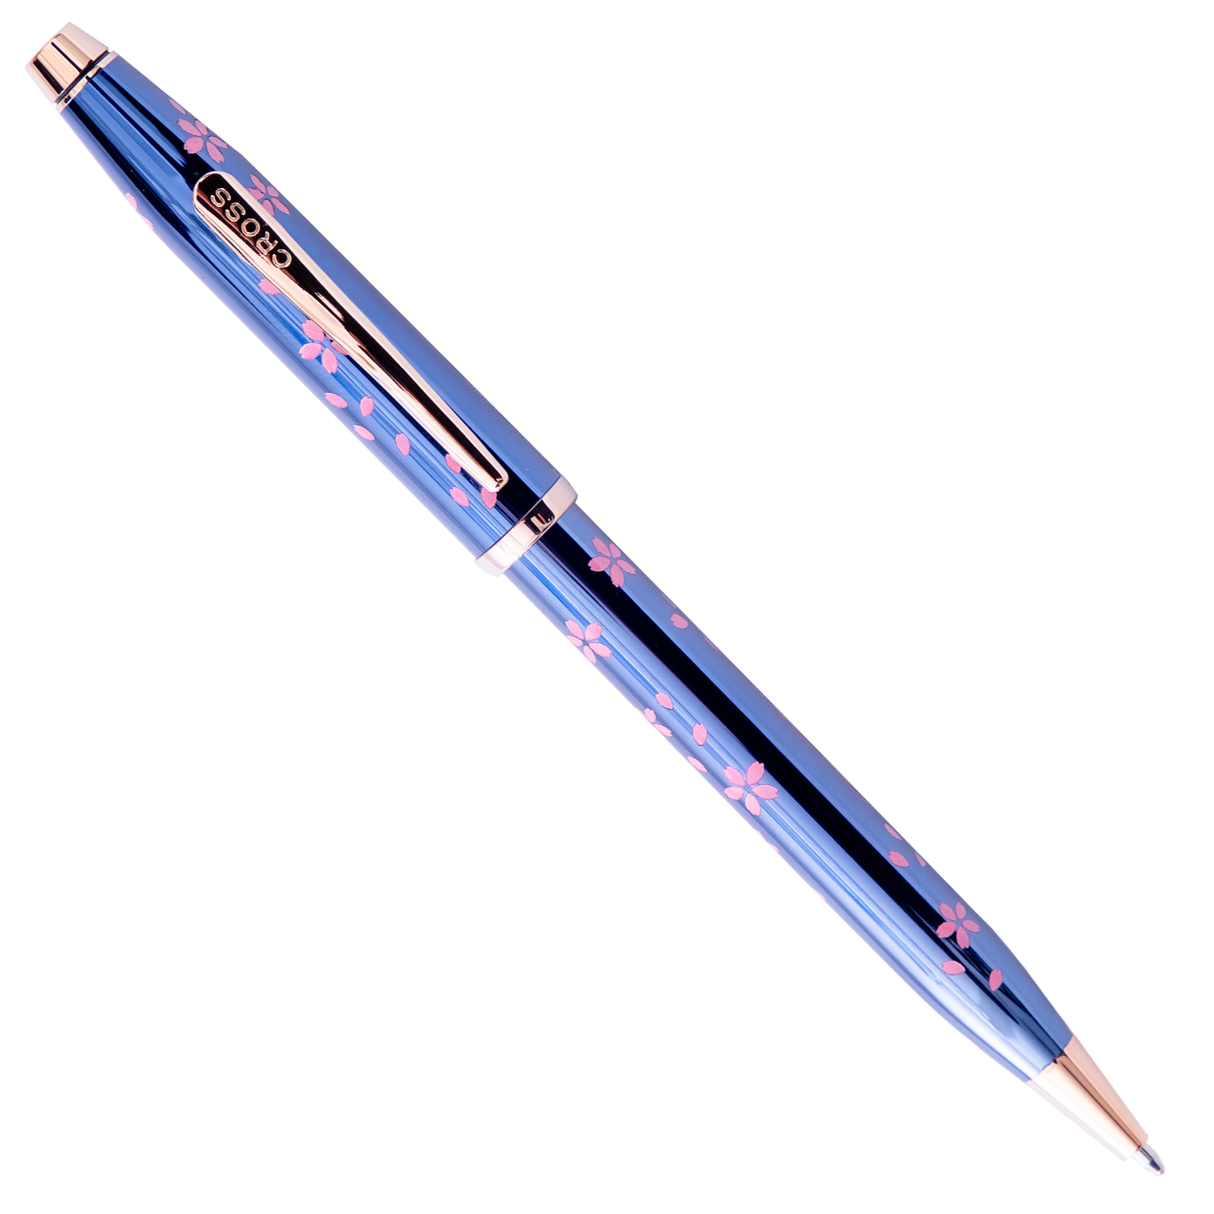 Cross Century II Cherry Blossom Translucent Blue Lacquer with Rose Gold Trim - Ballpoint